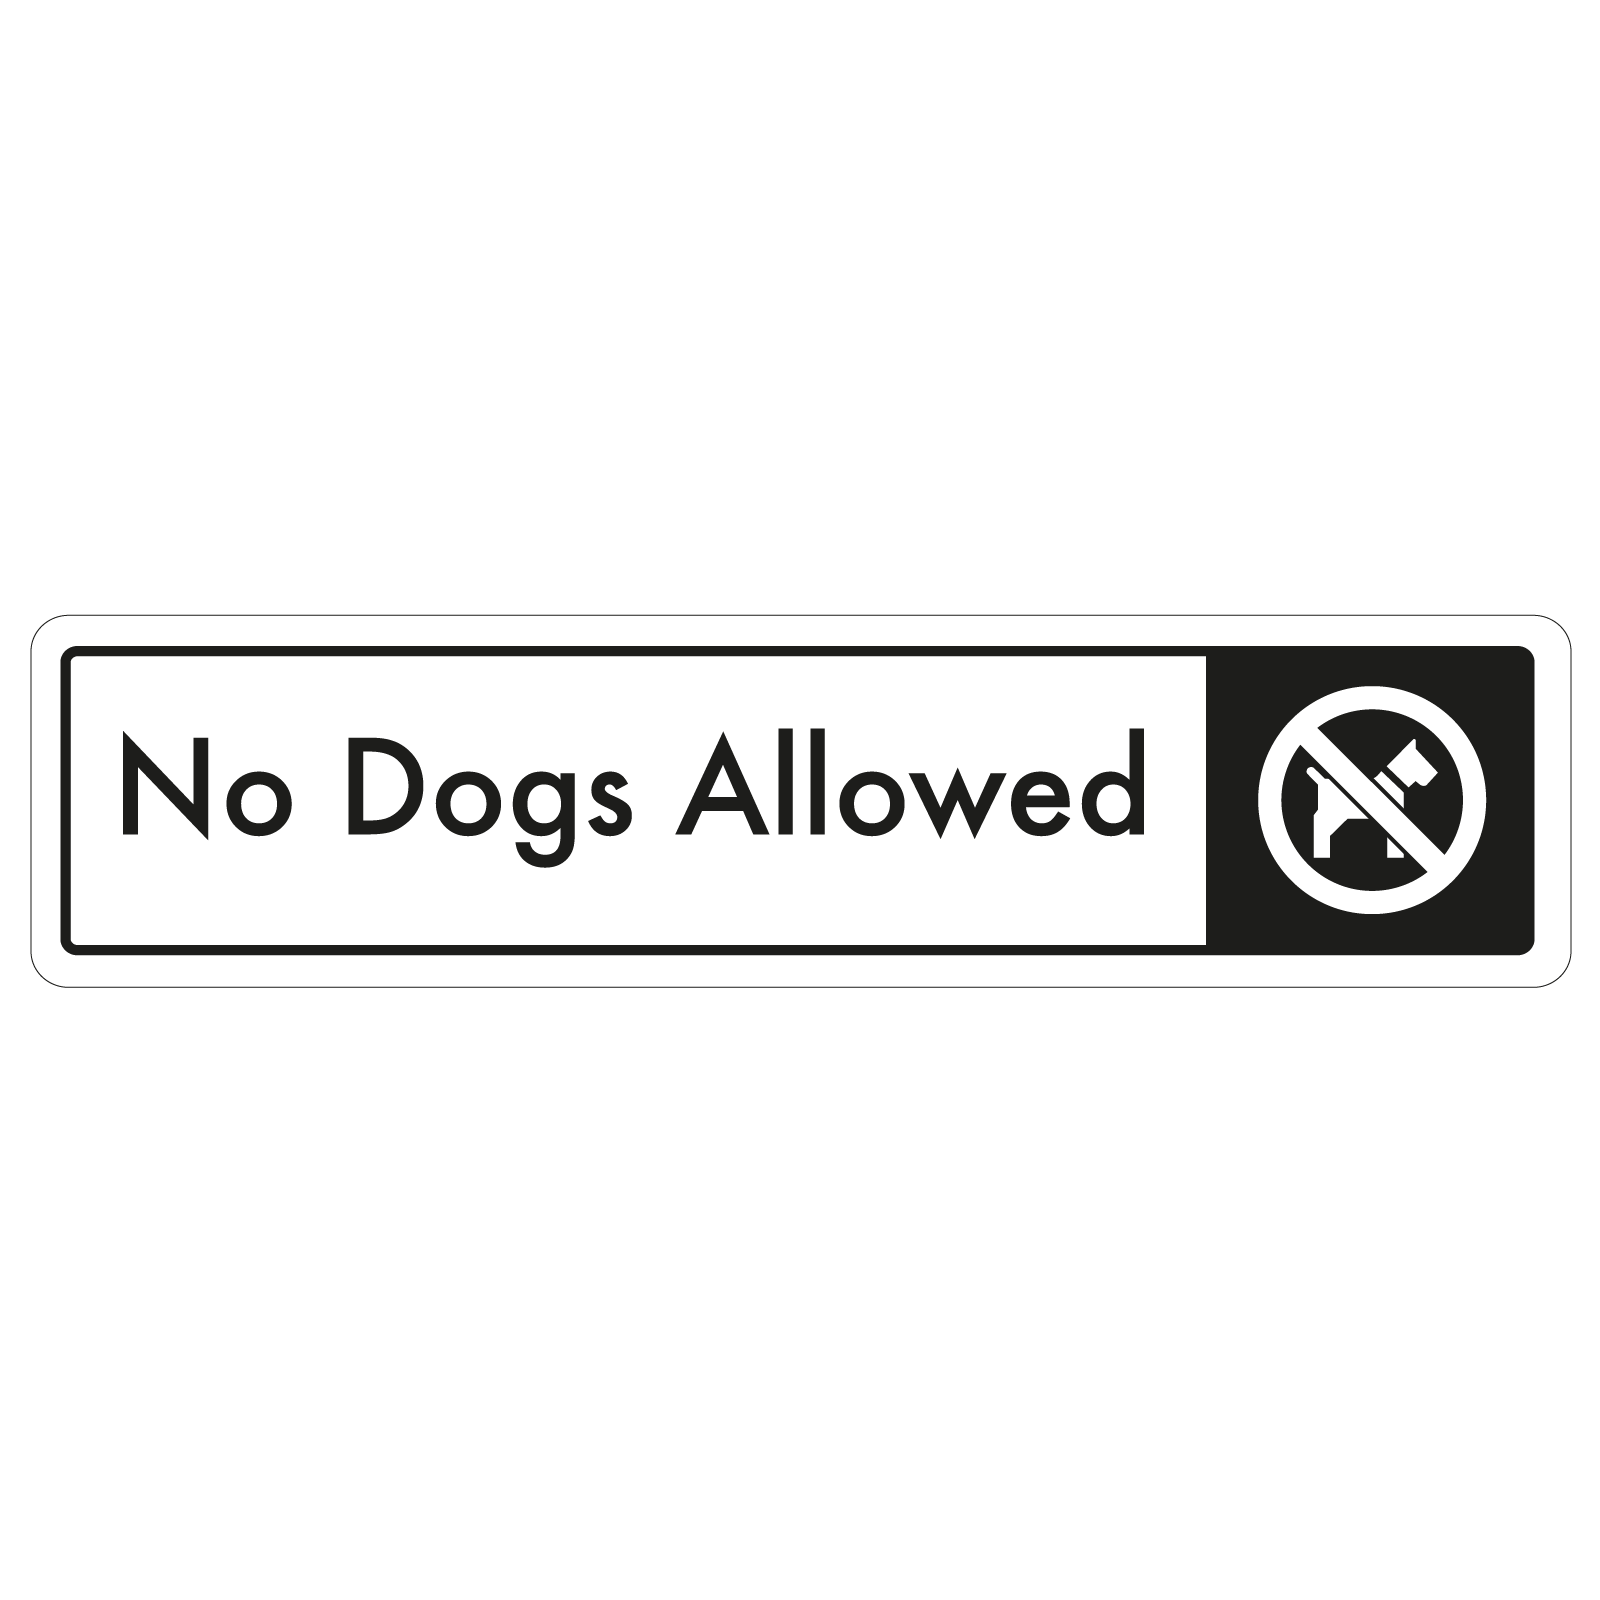 No Dogs Allowed Door Sign - Black on White 